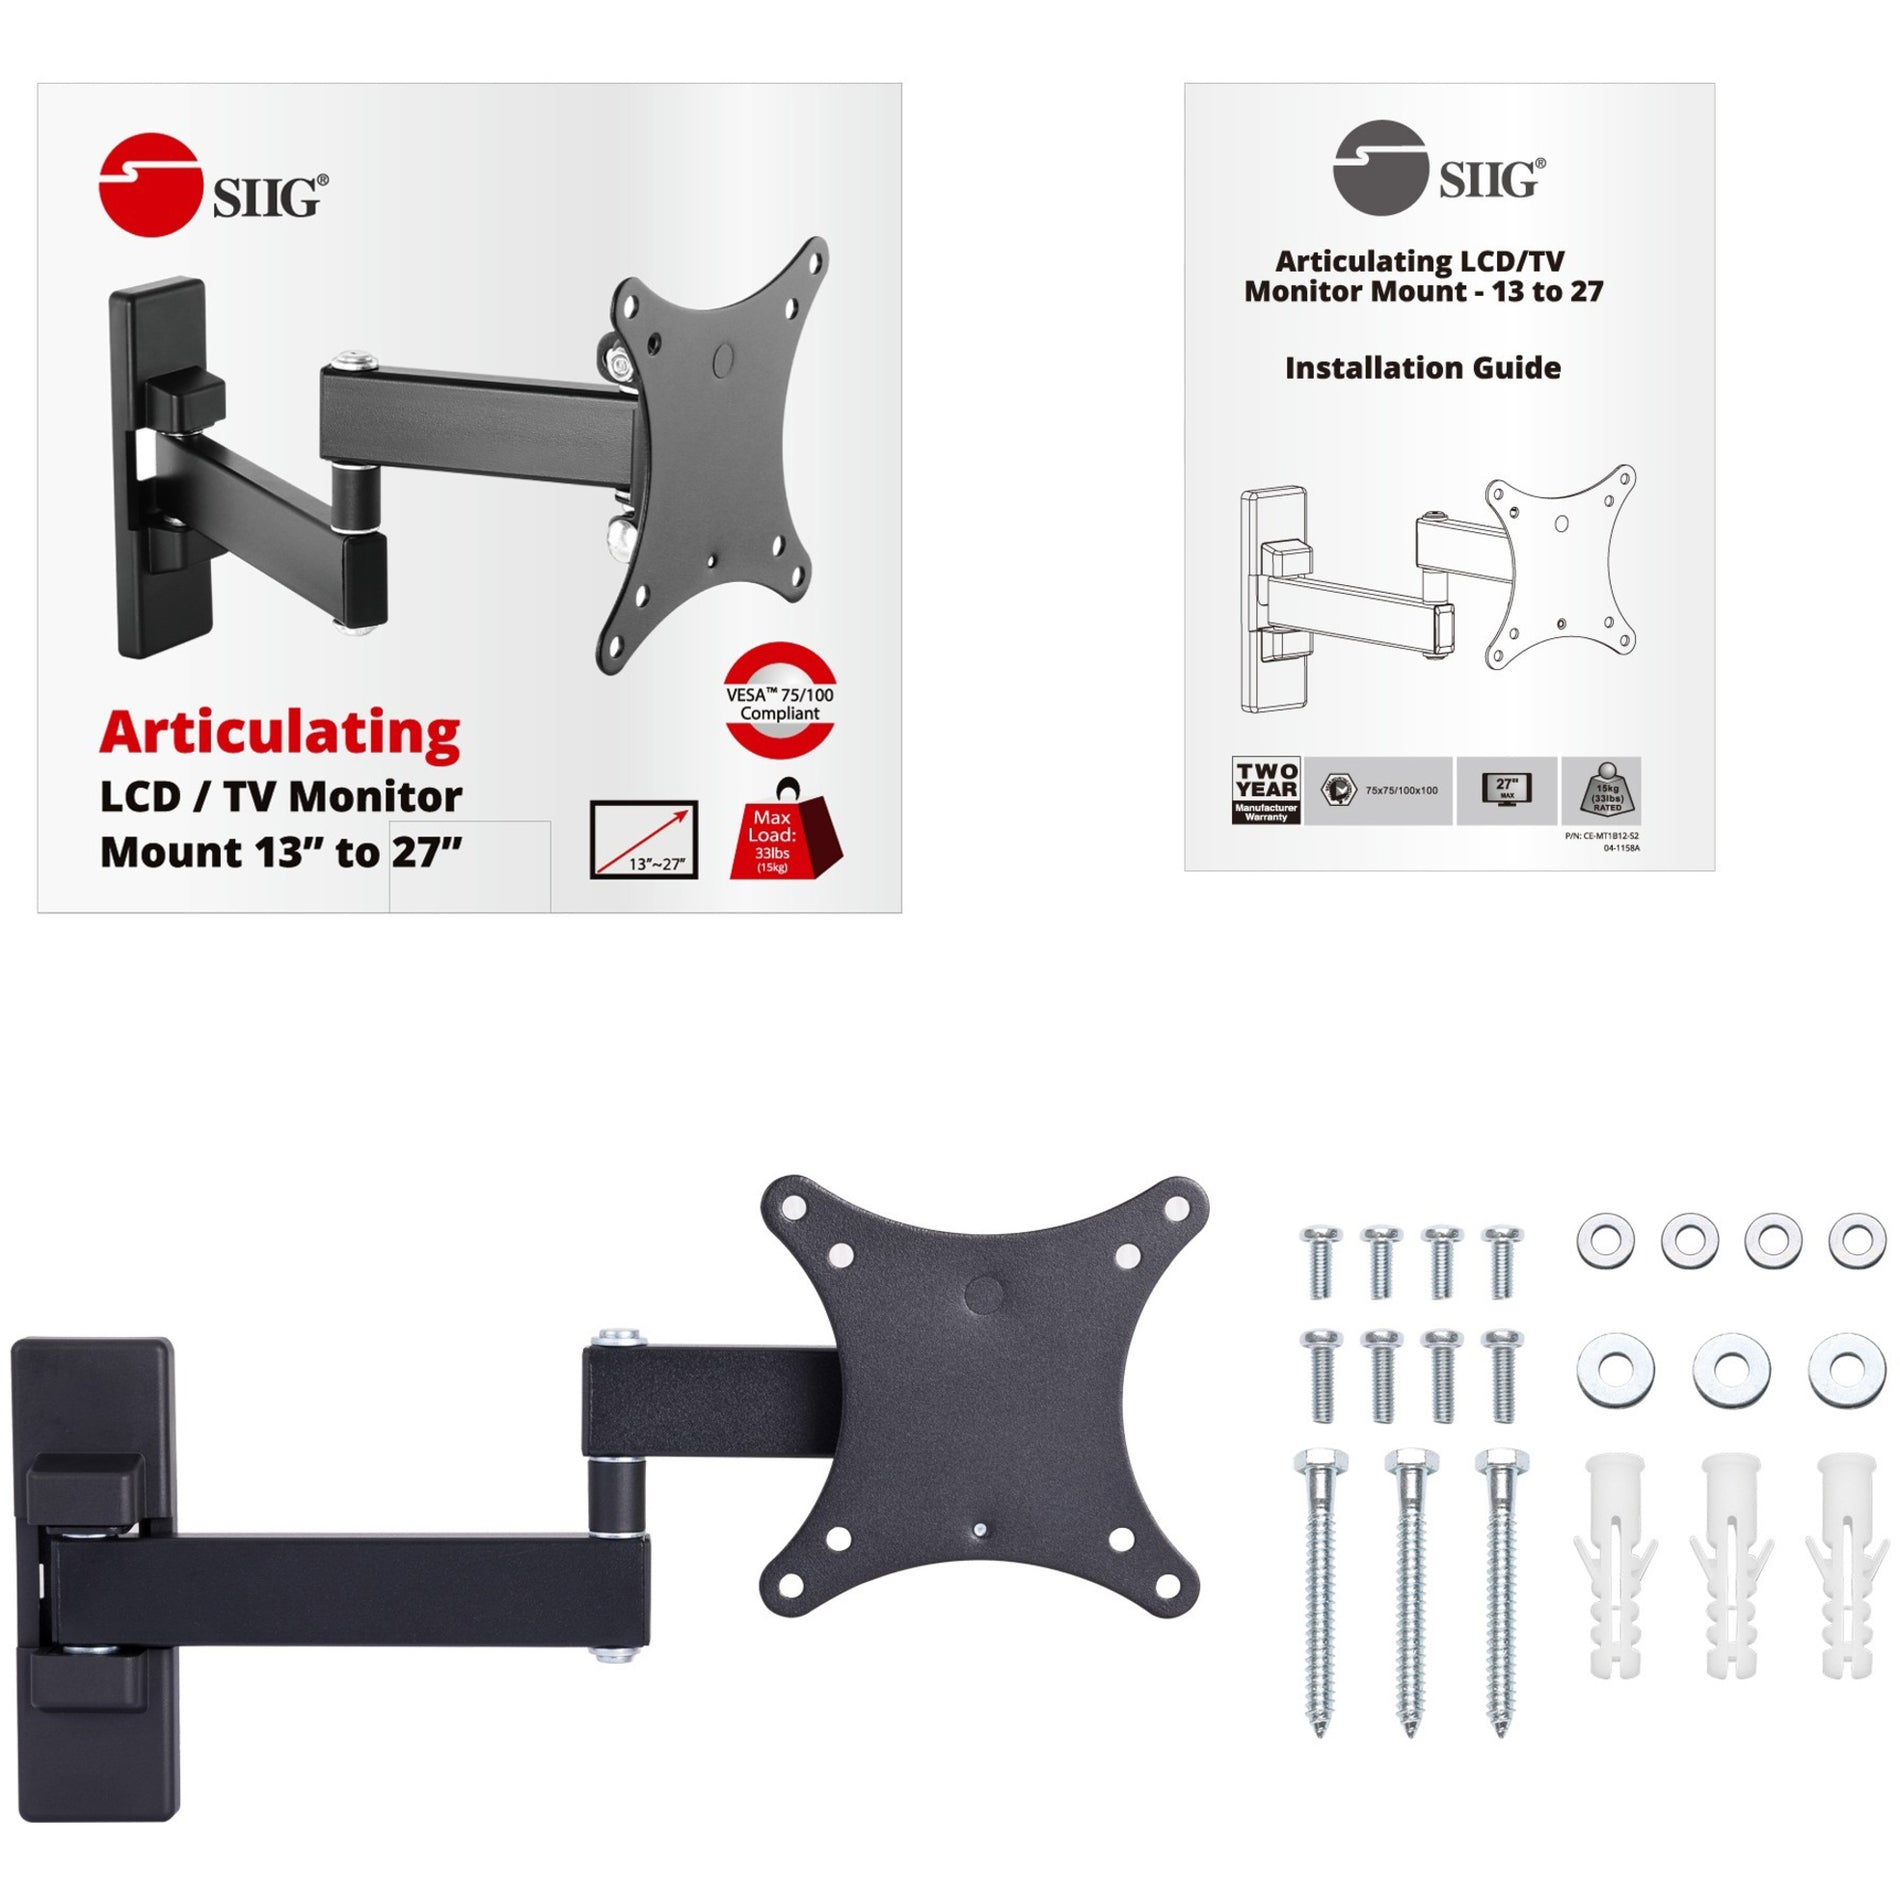 SIIG CE-MT1B12-S2 Articulating LCD/TV Monitor Mount - 13" to 27", Dual-Arm Wall-Mount for TVs and LCD Monitors, 33 lb Load Capacity